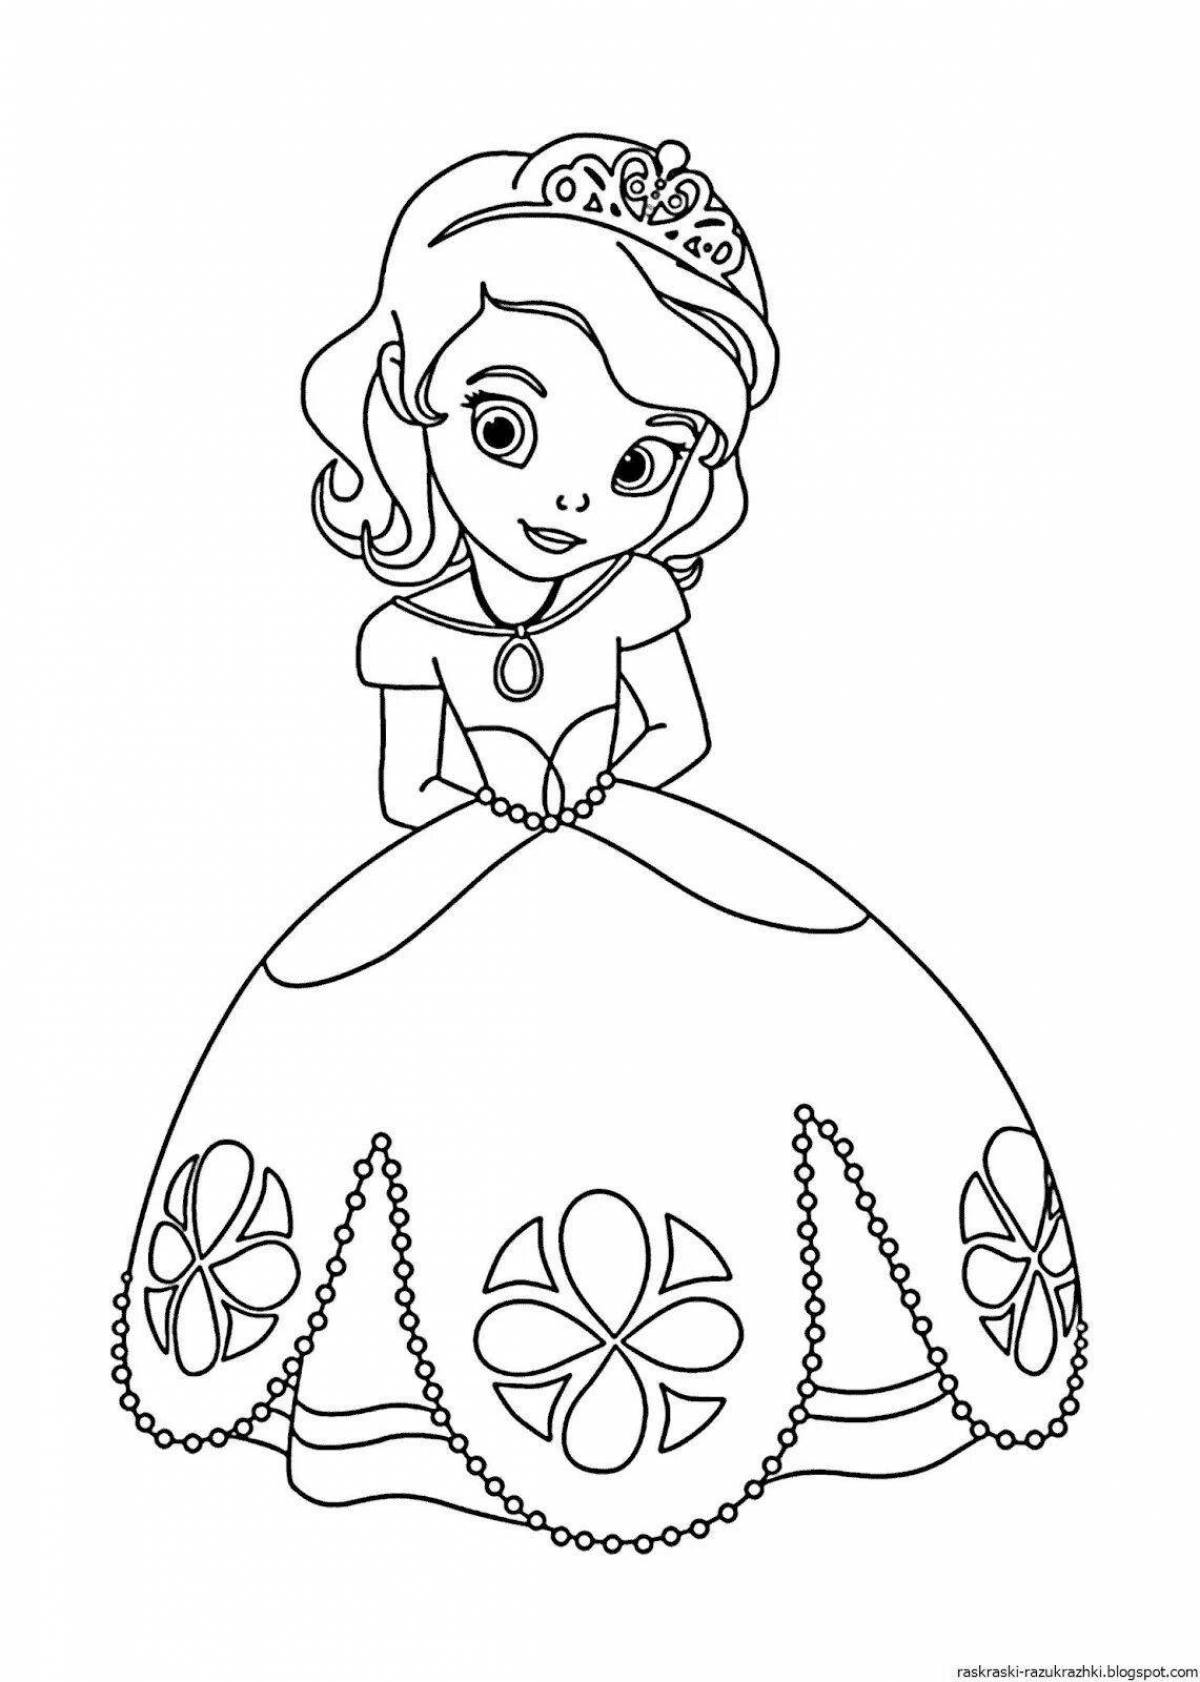 Elegant princess coloring pages for girls 6 years old